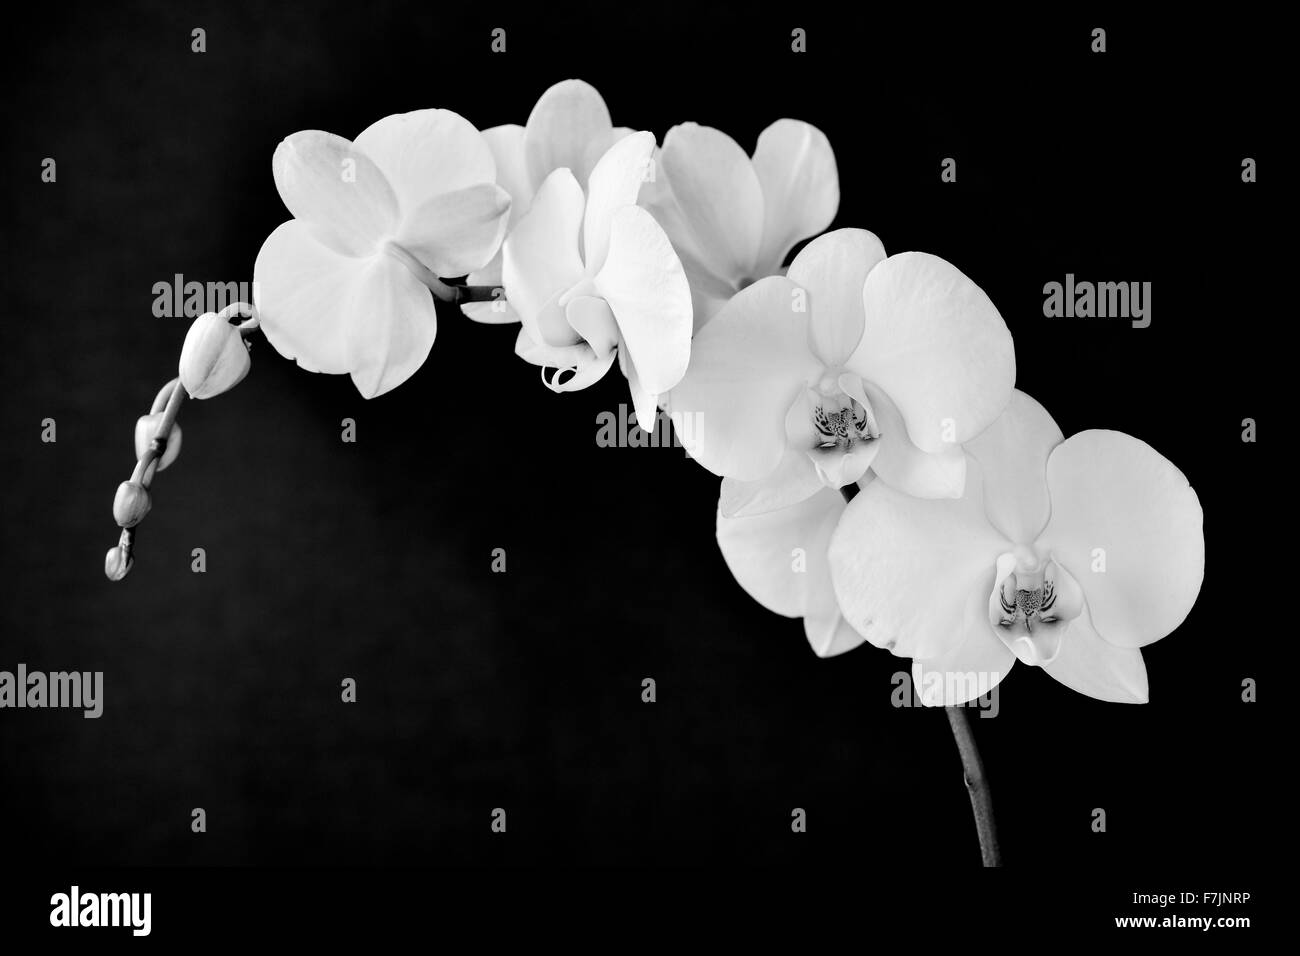 detail of the beautiful white flowers of a Phalaenopsis aphrodite orchid in black and white Stock Photo